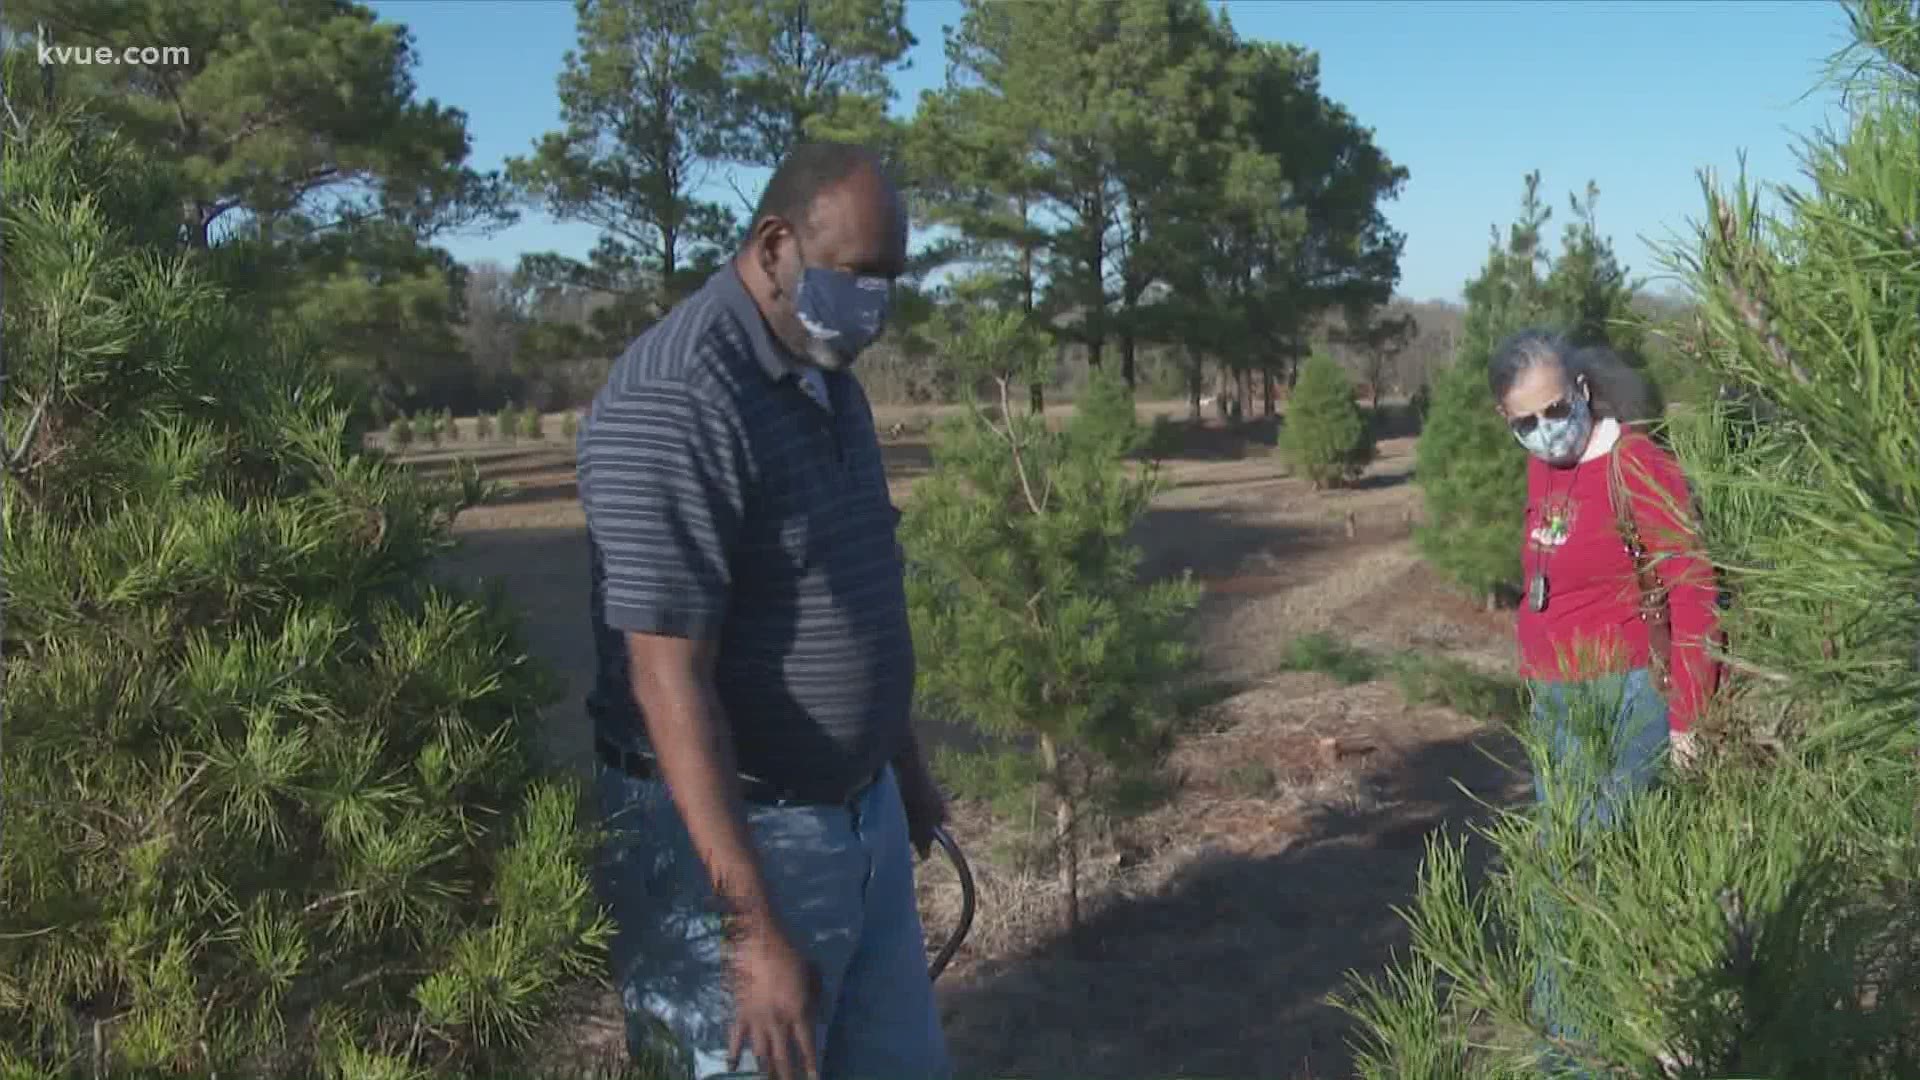 Christmas tree farms are running out of stock this year. Owners say they are selling out earlier than expected.